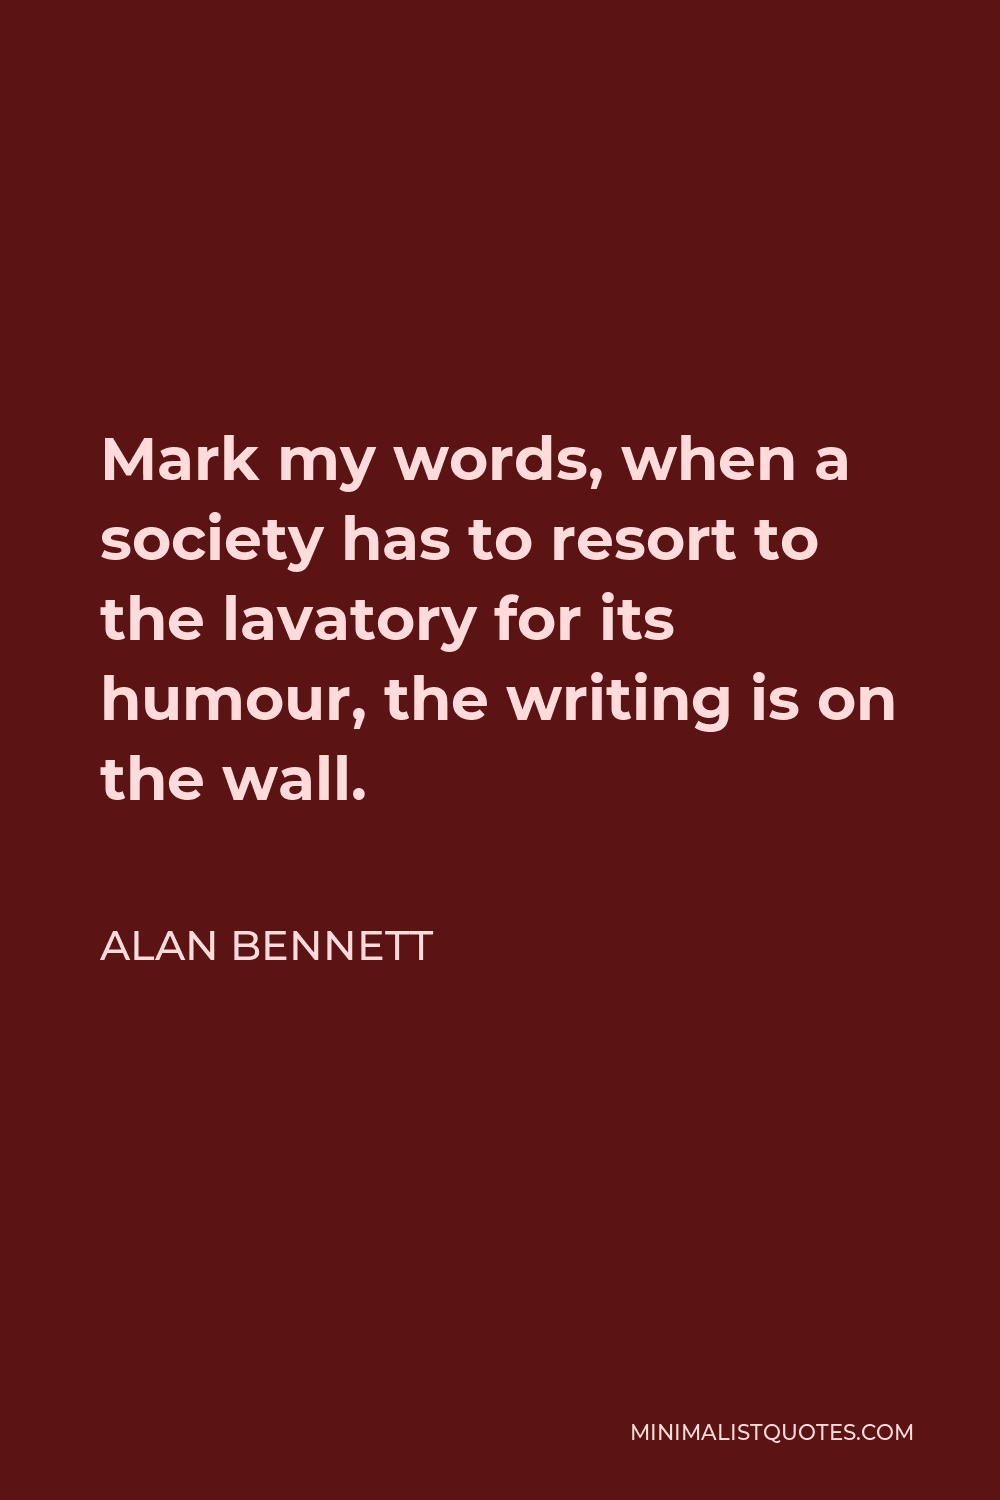 Alan Bennett Quote - Mark my words, when a society has to resort to the lavatory for its humour, the writing is on the wall.